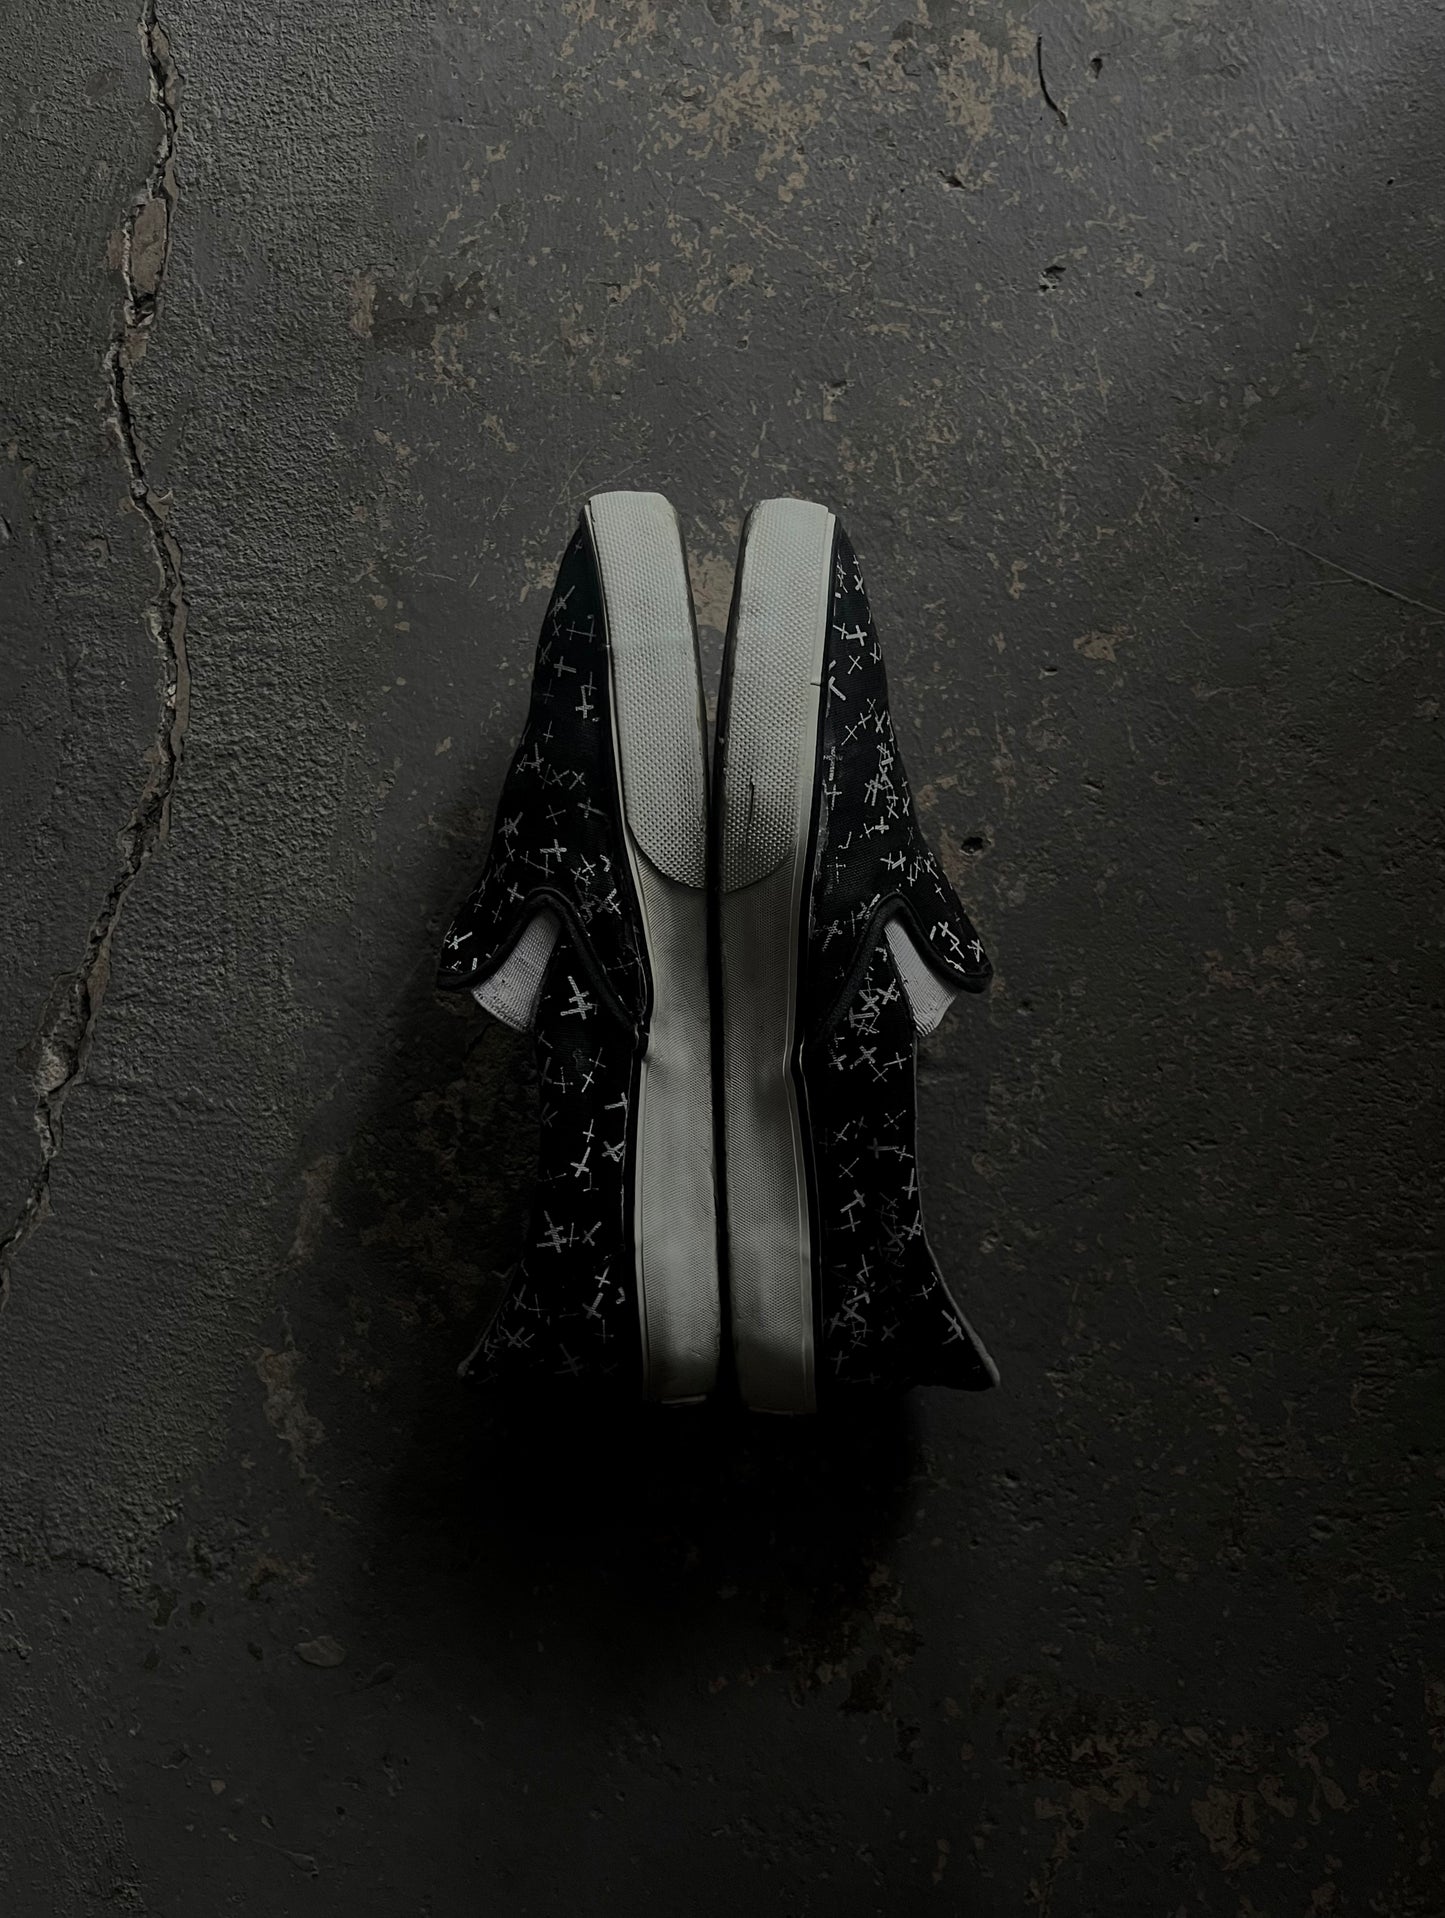 Undercover AW02 “Witches Cell Division” Cross Slip-on’s